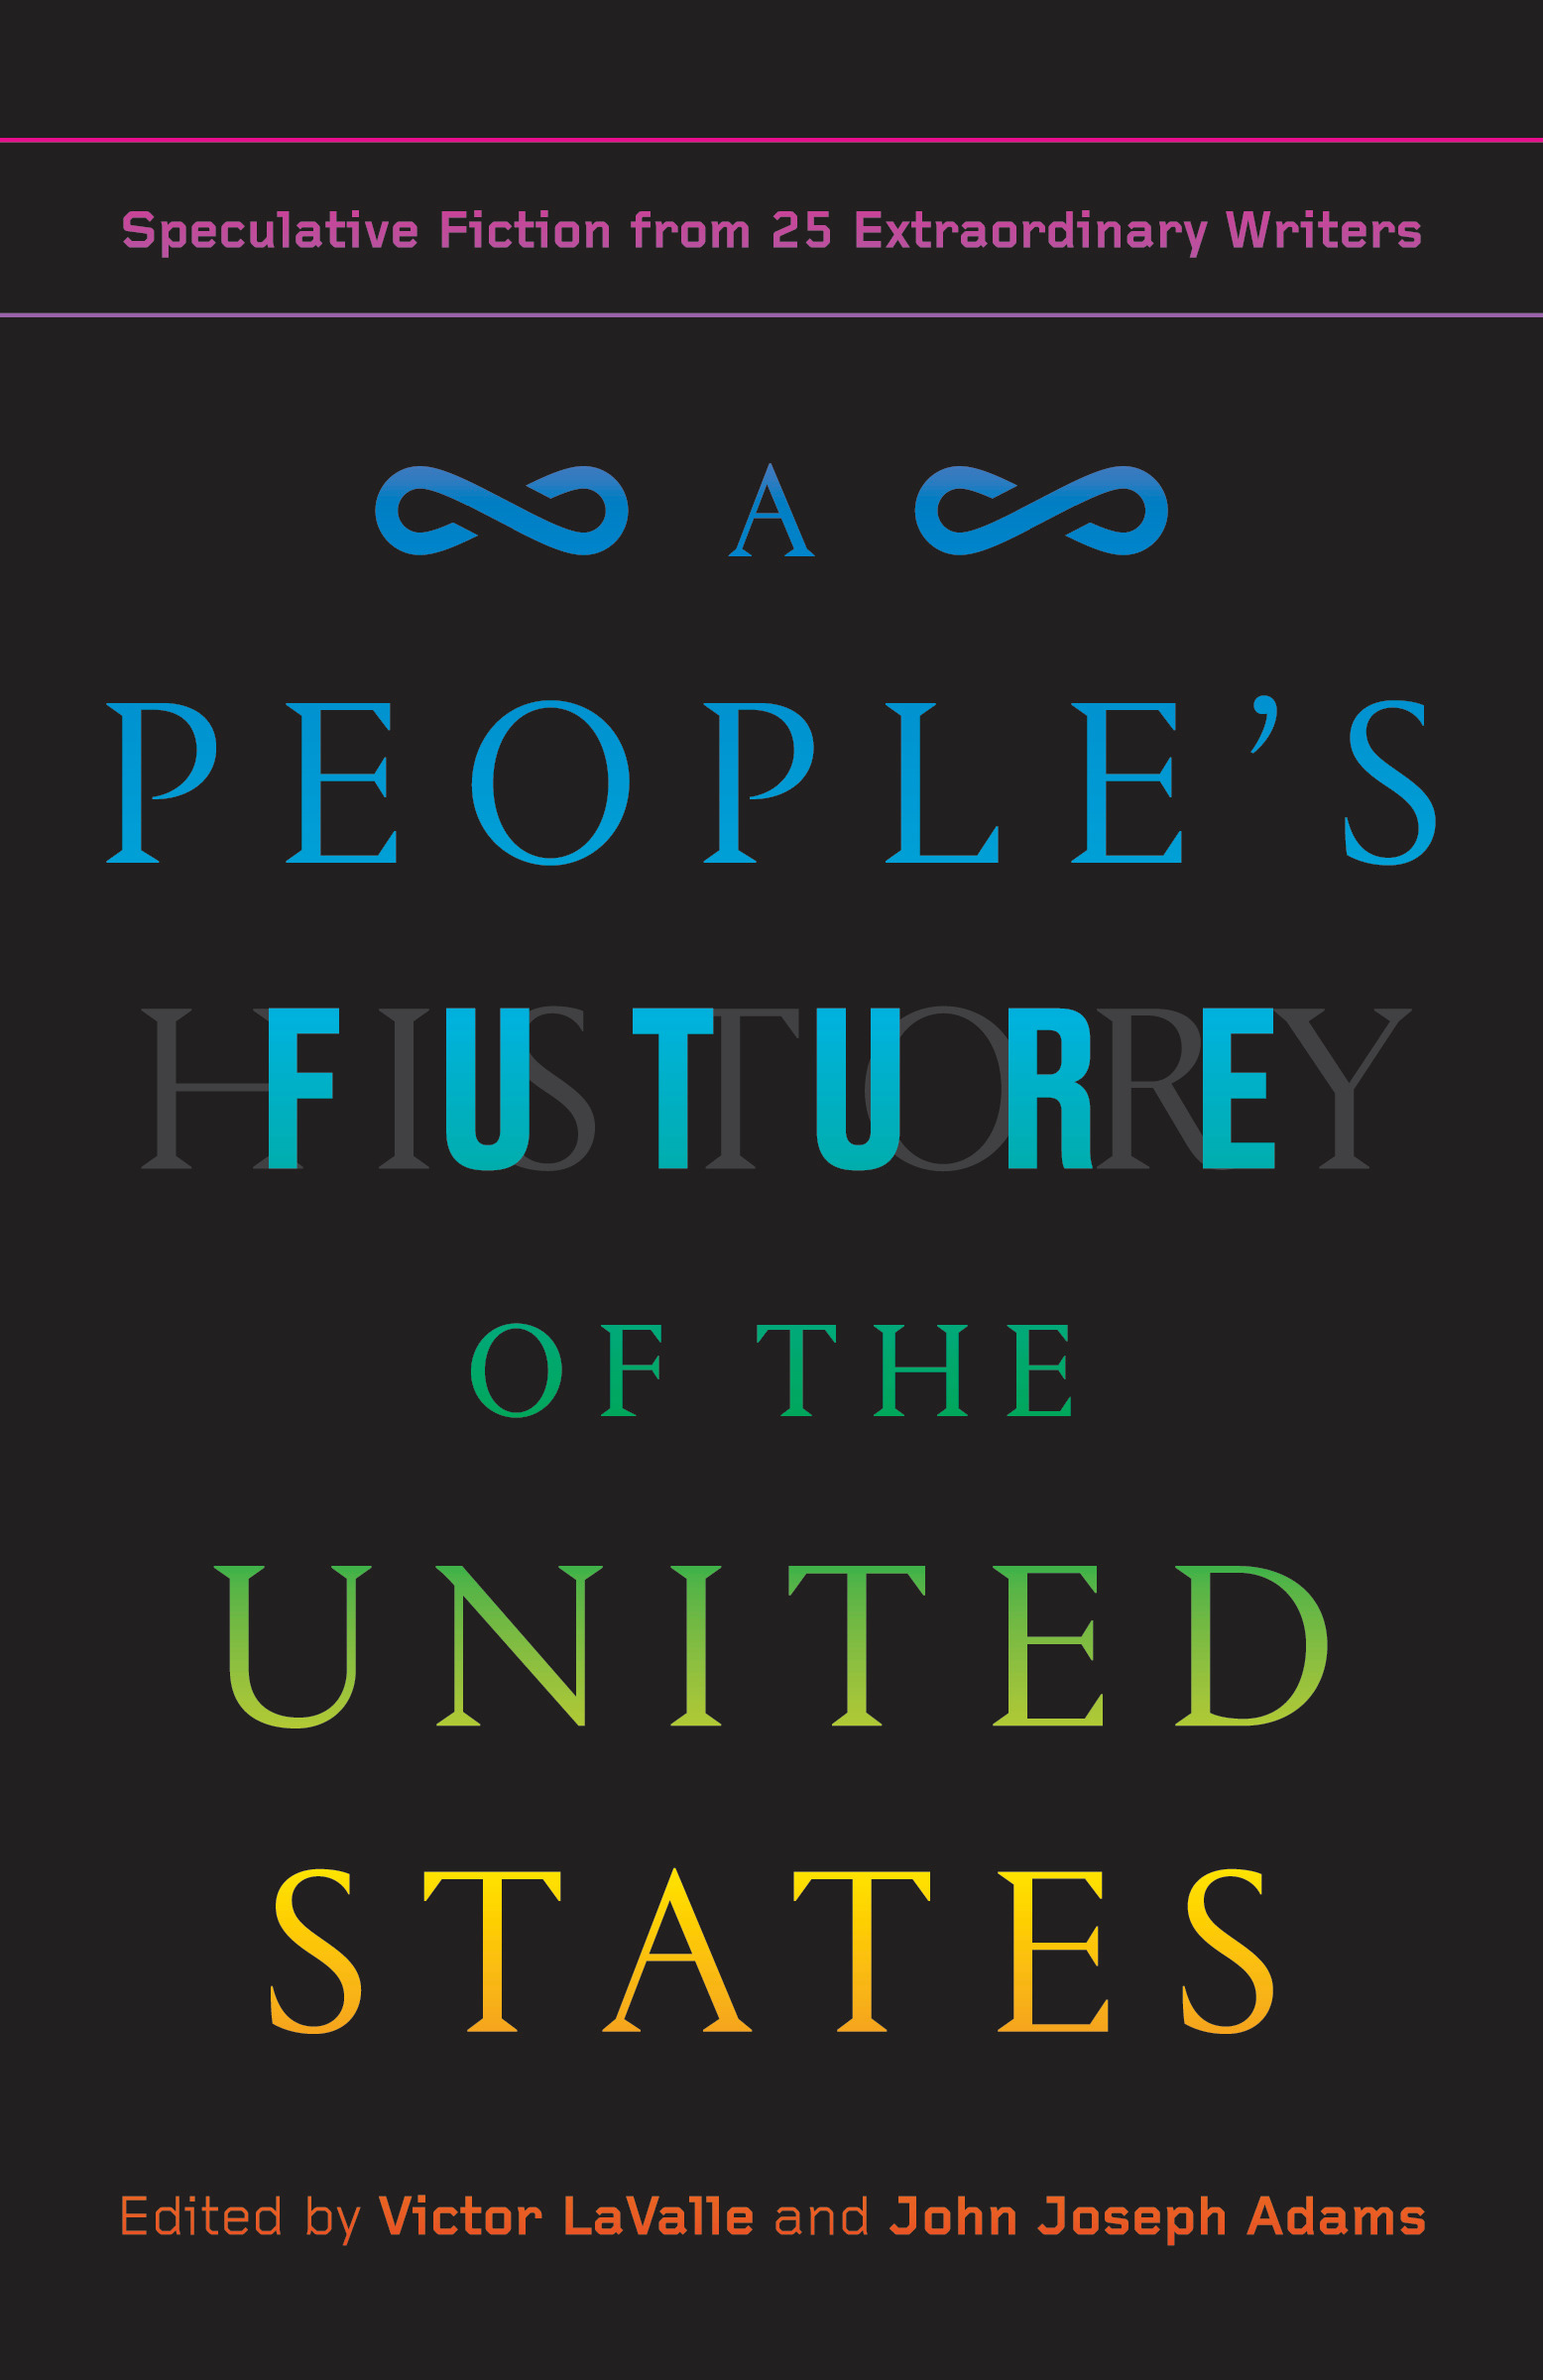 Charlie Jane Anders, Charles Yu, Lesley Nneka Arimah: A People's Future of the United States (Paperback, 2019, One World, Random House Publishing Group)